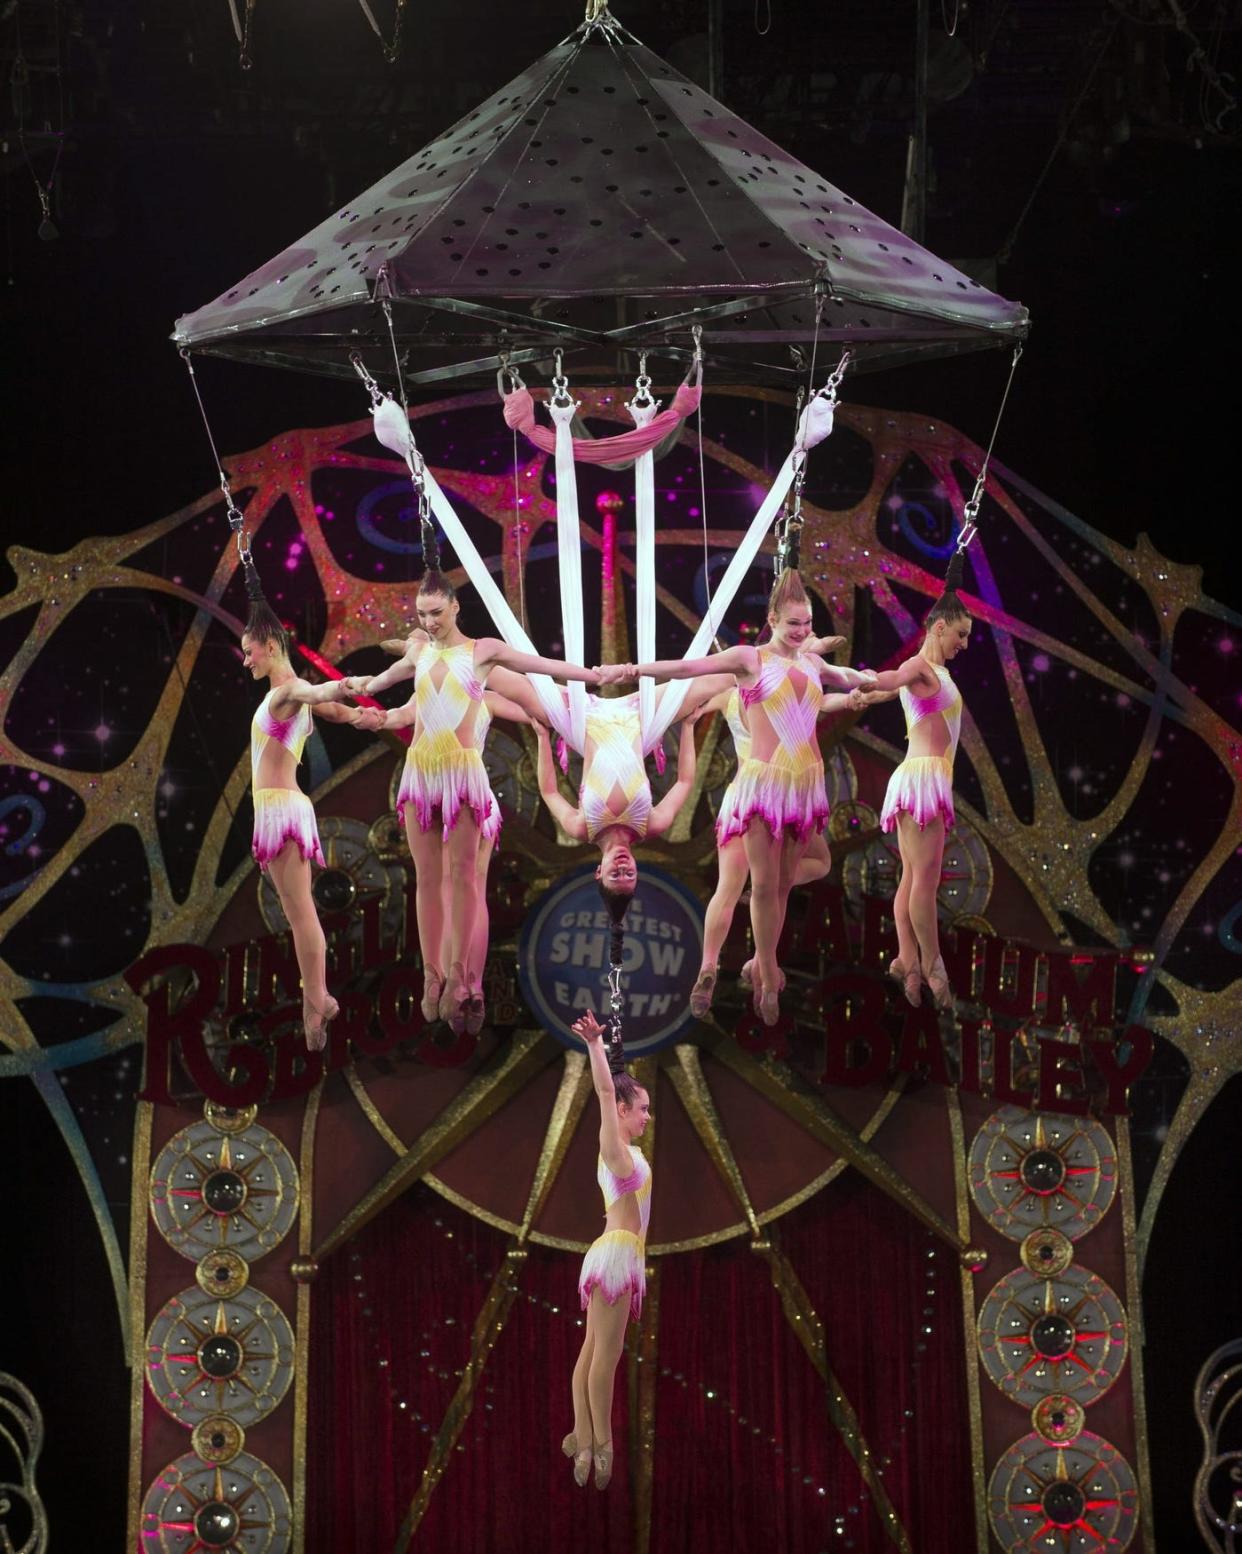 A Promotional photo showing the Lotus Blossom hair-hanging act that was in the Circus accident at the Ringling Bros. and Barnum & Bailey Legends Tour Sunday, May 4, 2014 at The Dunkin' Donuts Center in Providence.